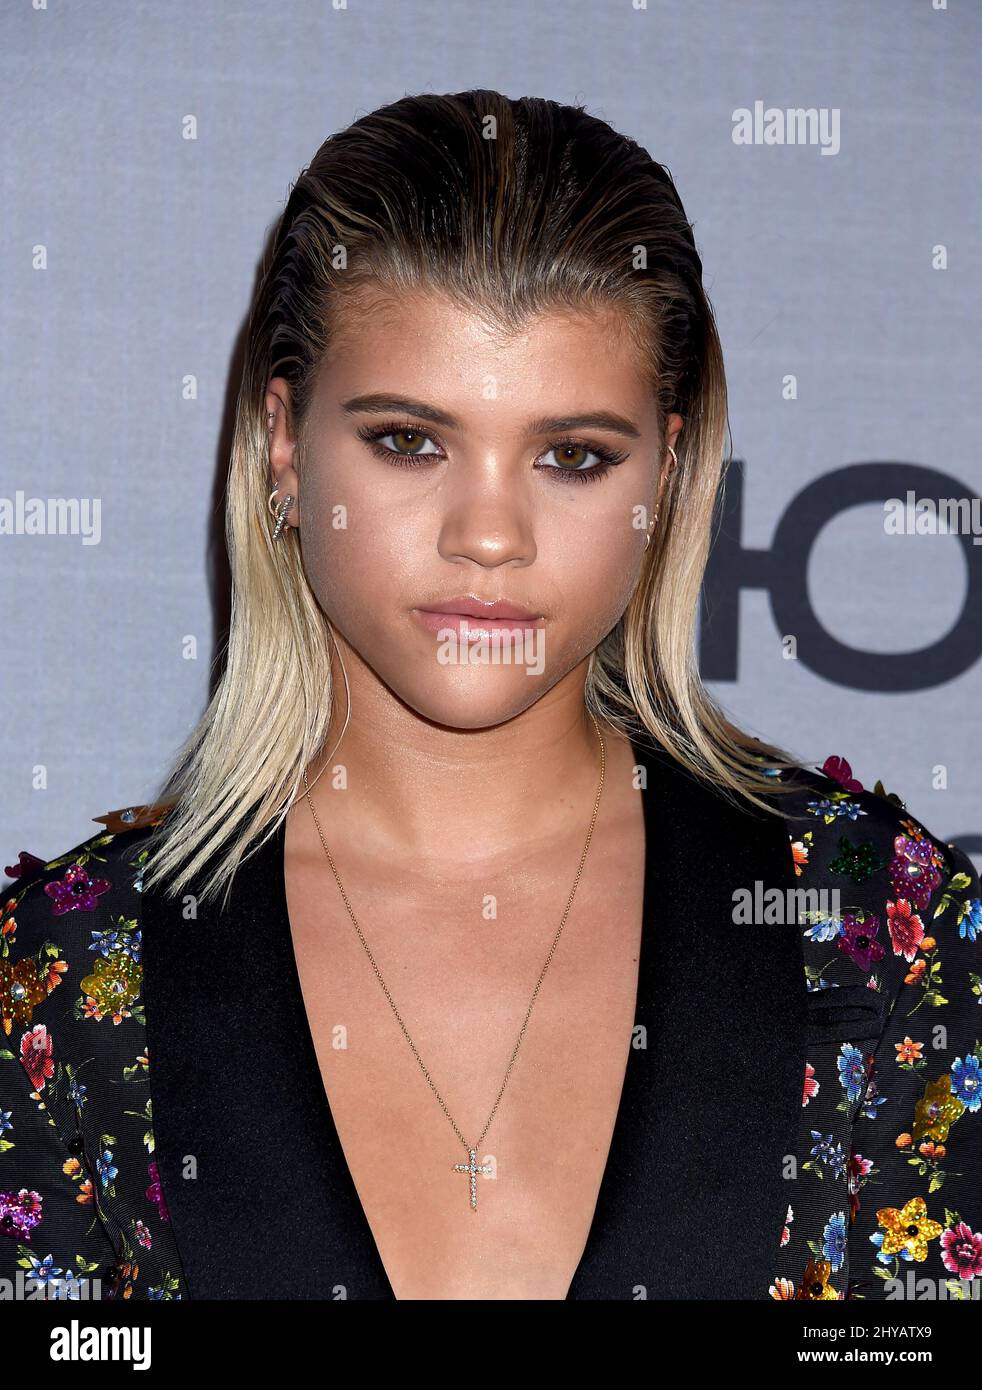 Sofia Richie nimmt an den „InStyle Awards 2016“ in Los Angeles Teil Stockfoto